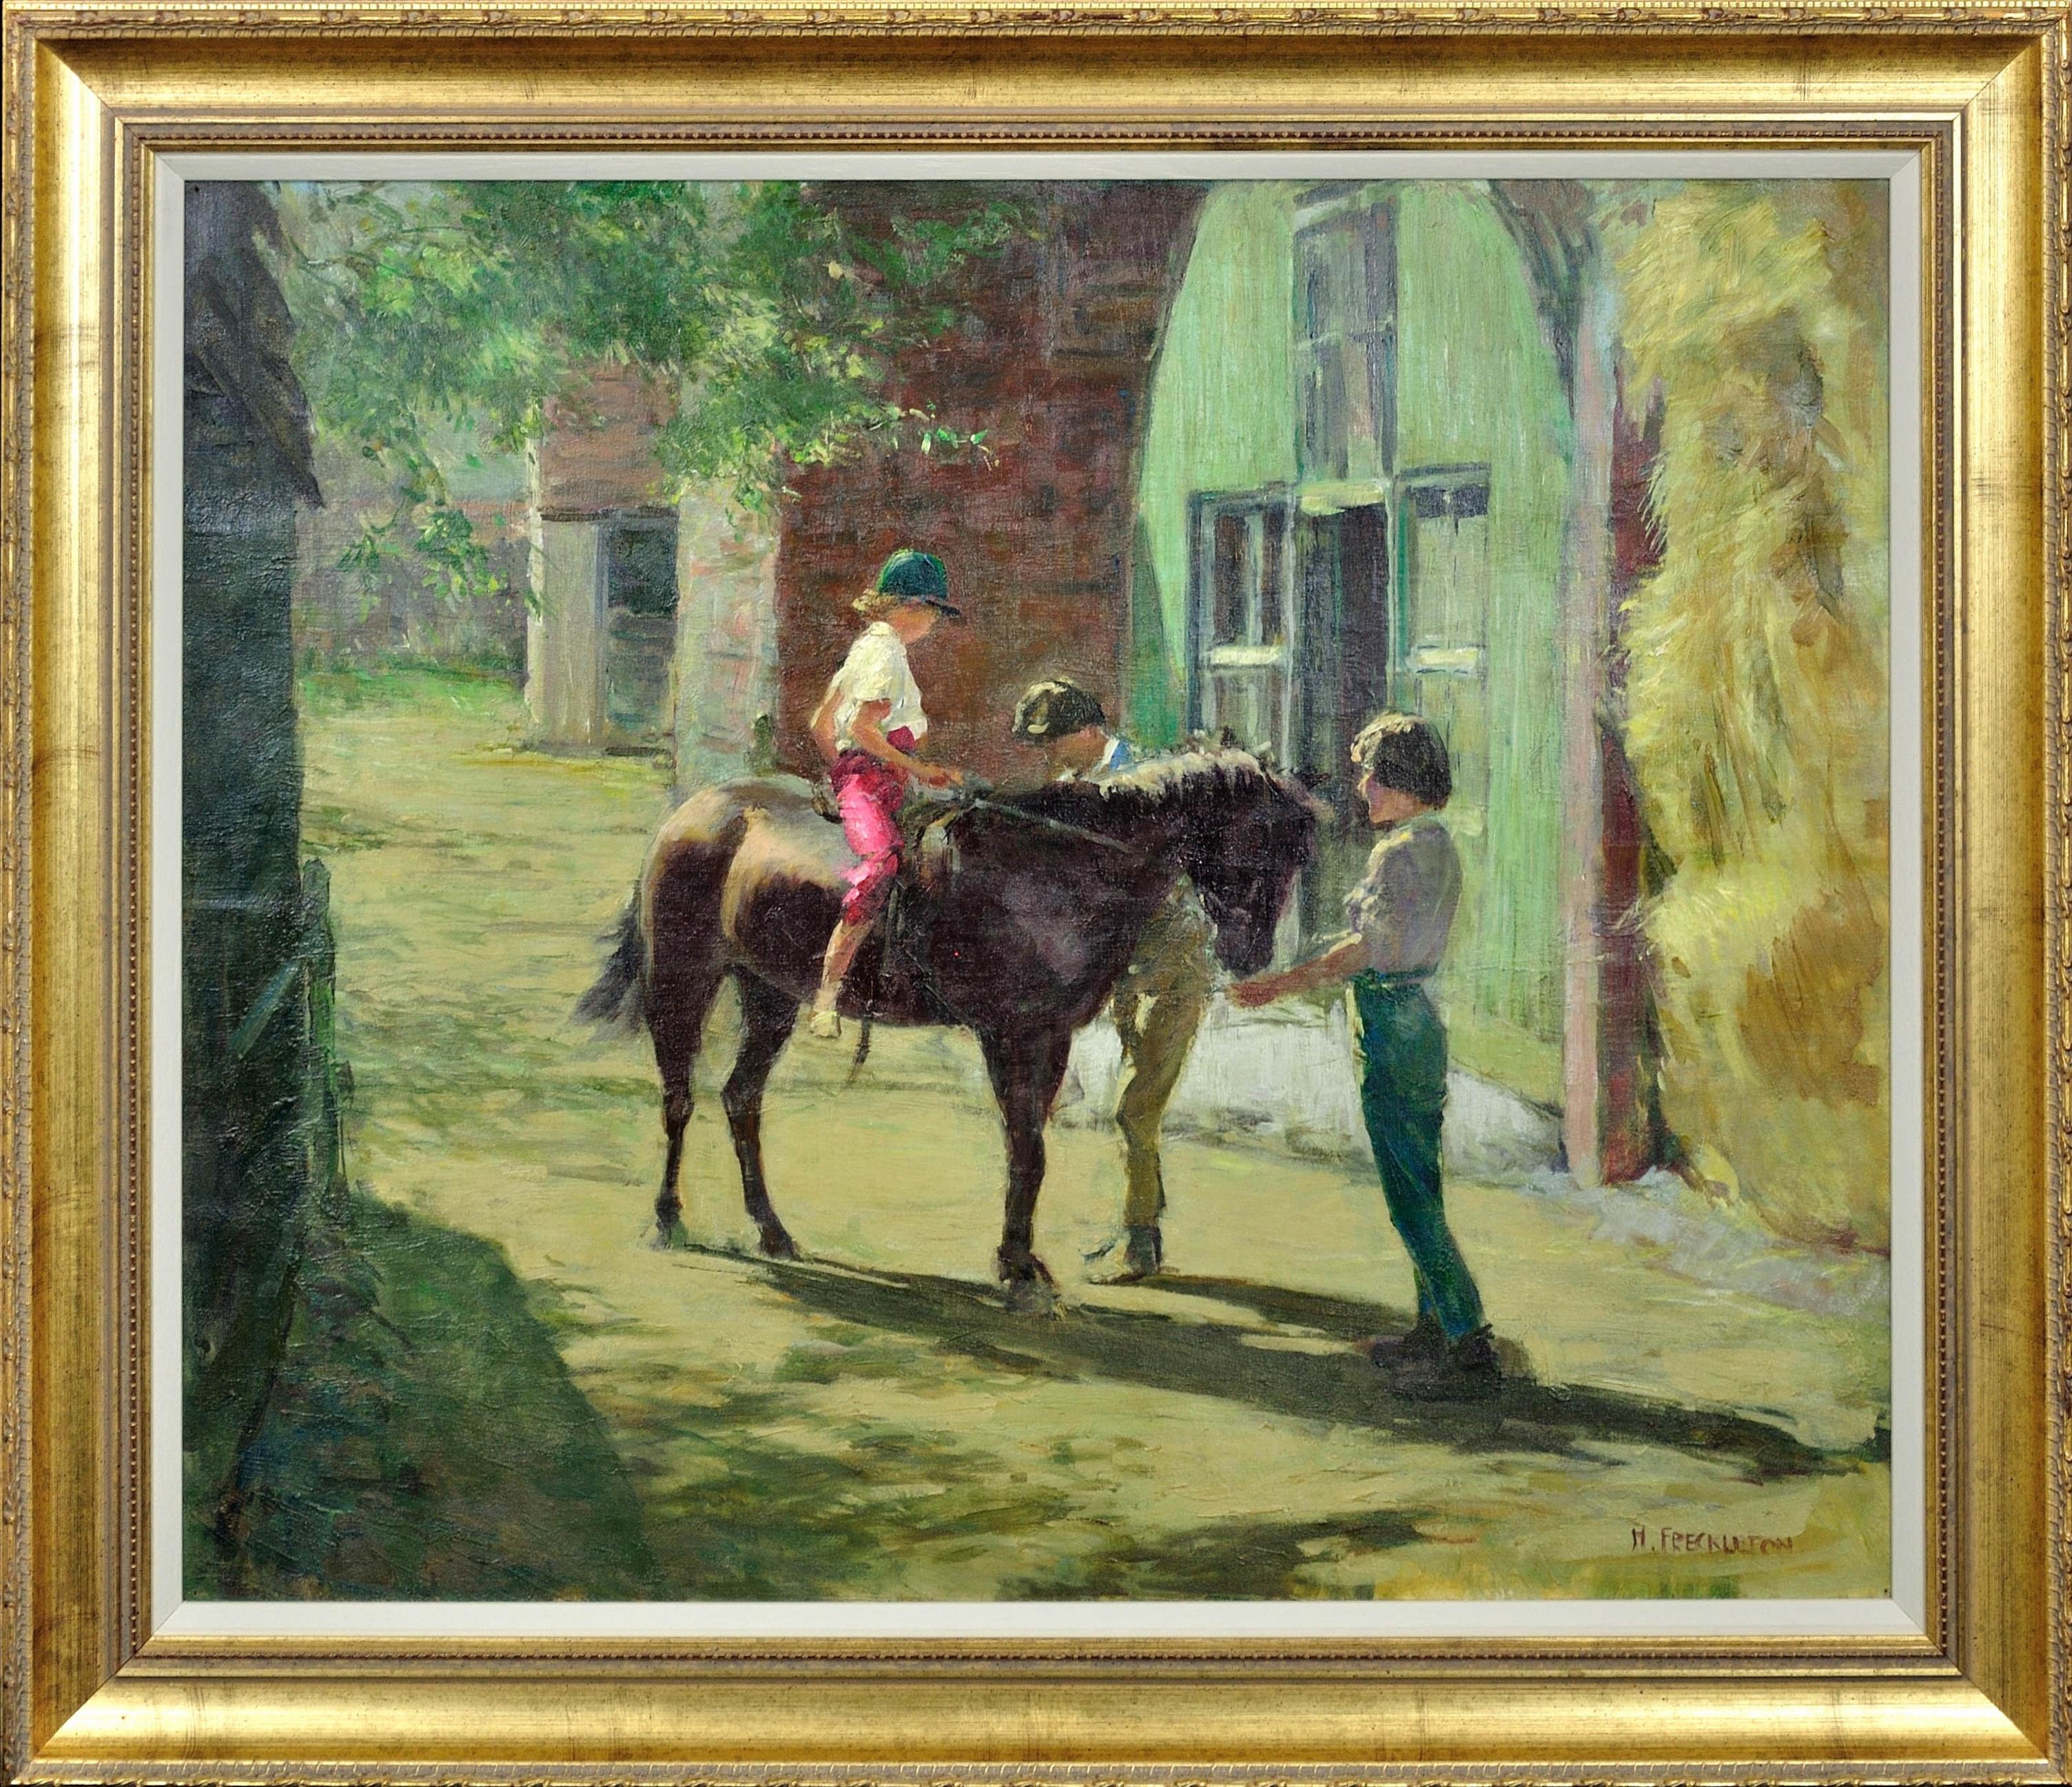 Harold Walton Freckleton Animal Painting - Milly with Minstrel. Children with their Pony in Dappled Summer Sunlight.